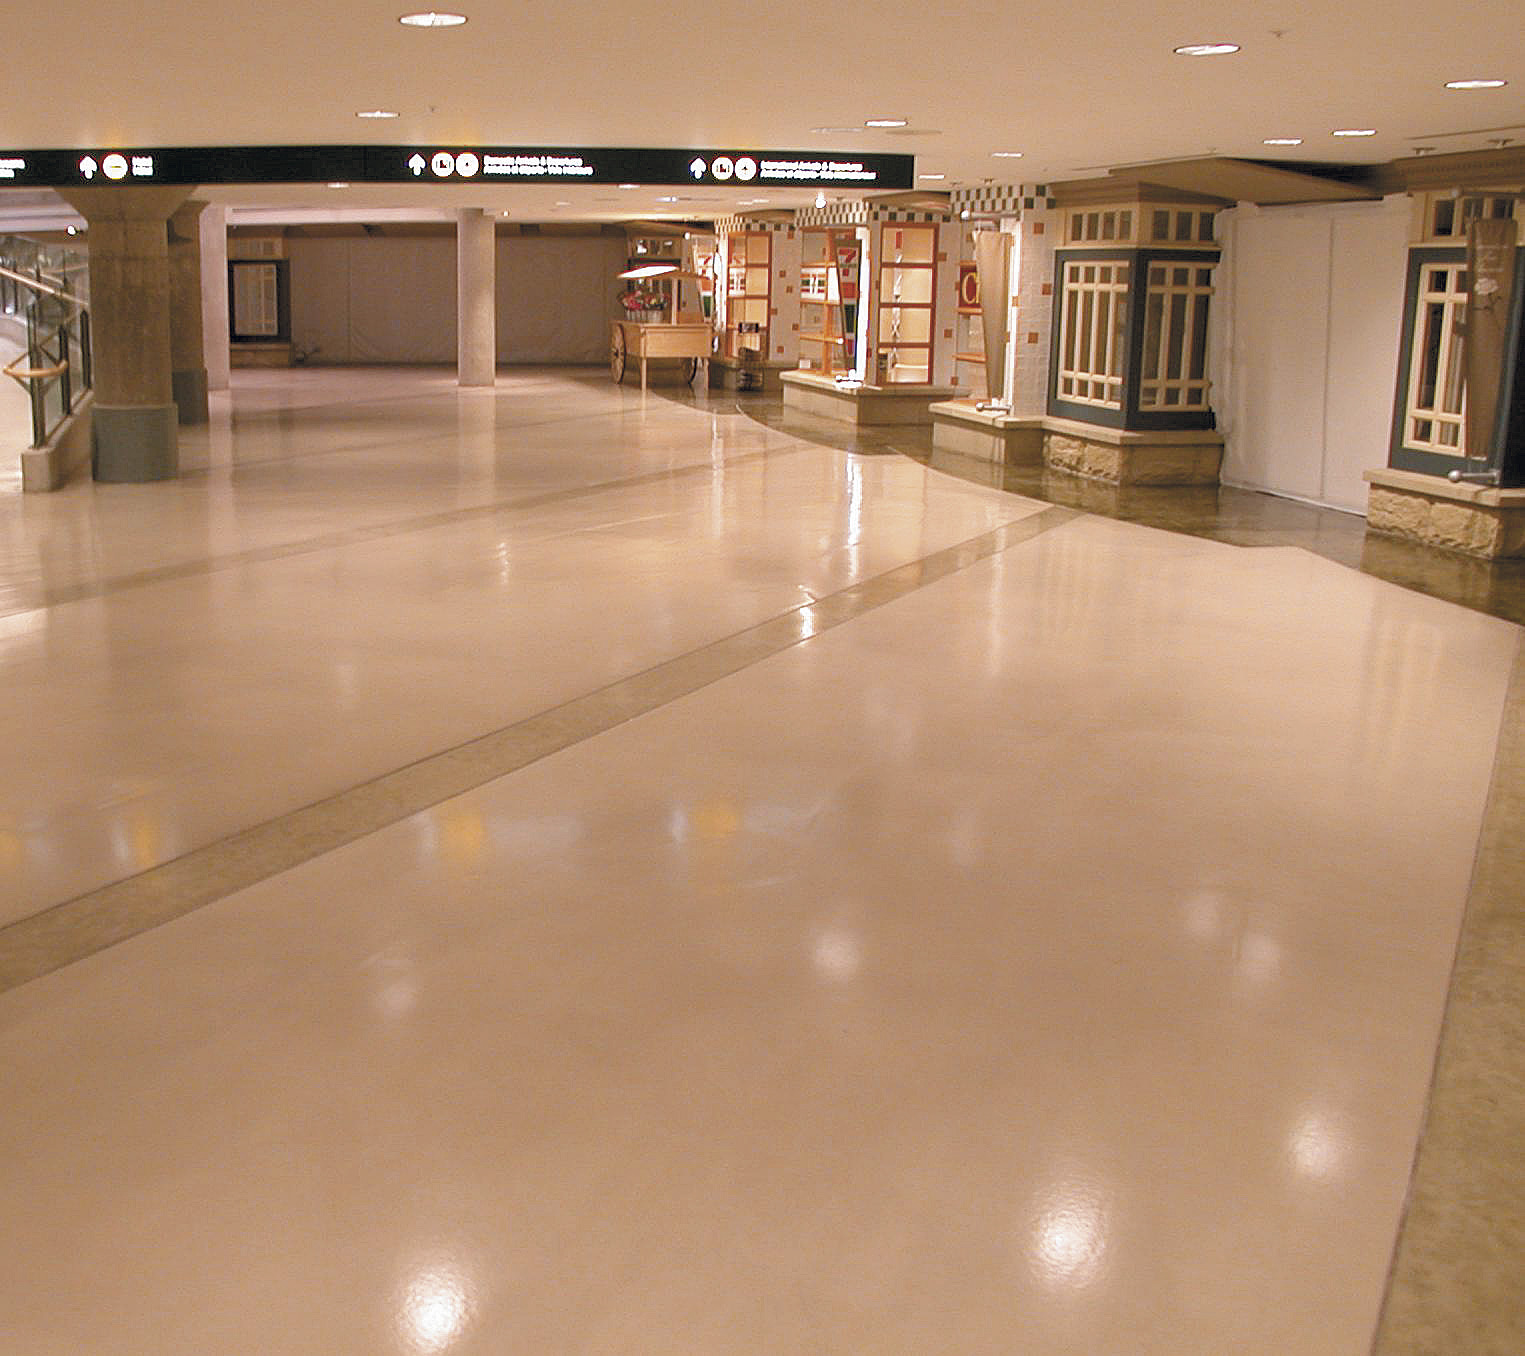  Vancouver International Airport Domestic Terminal gets a major renovation with this decorative concrete treatment.